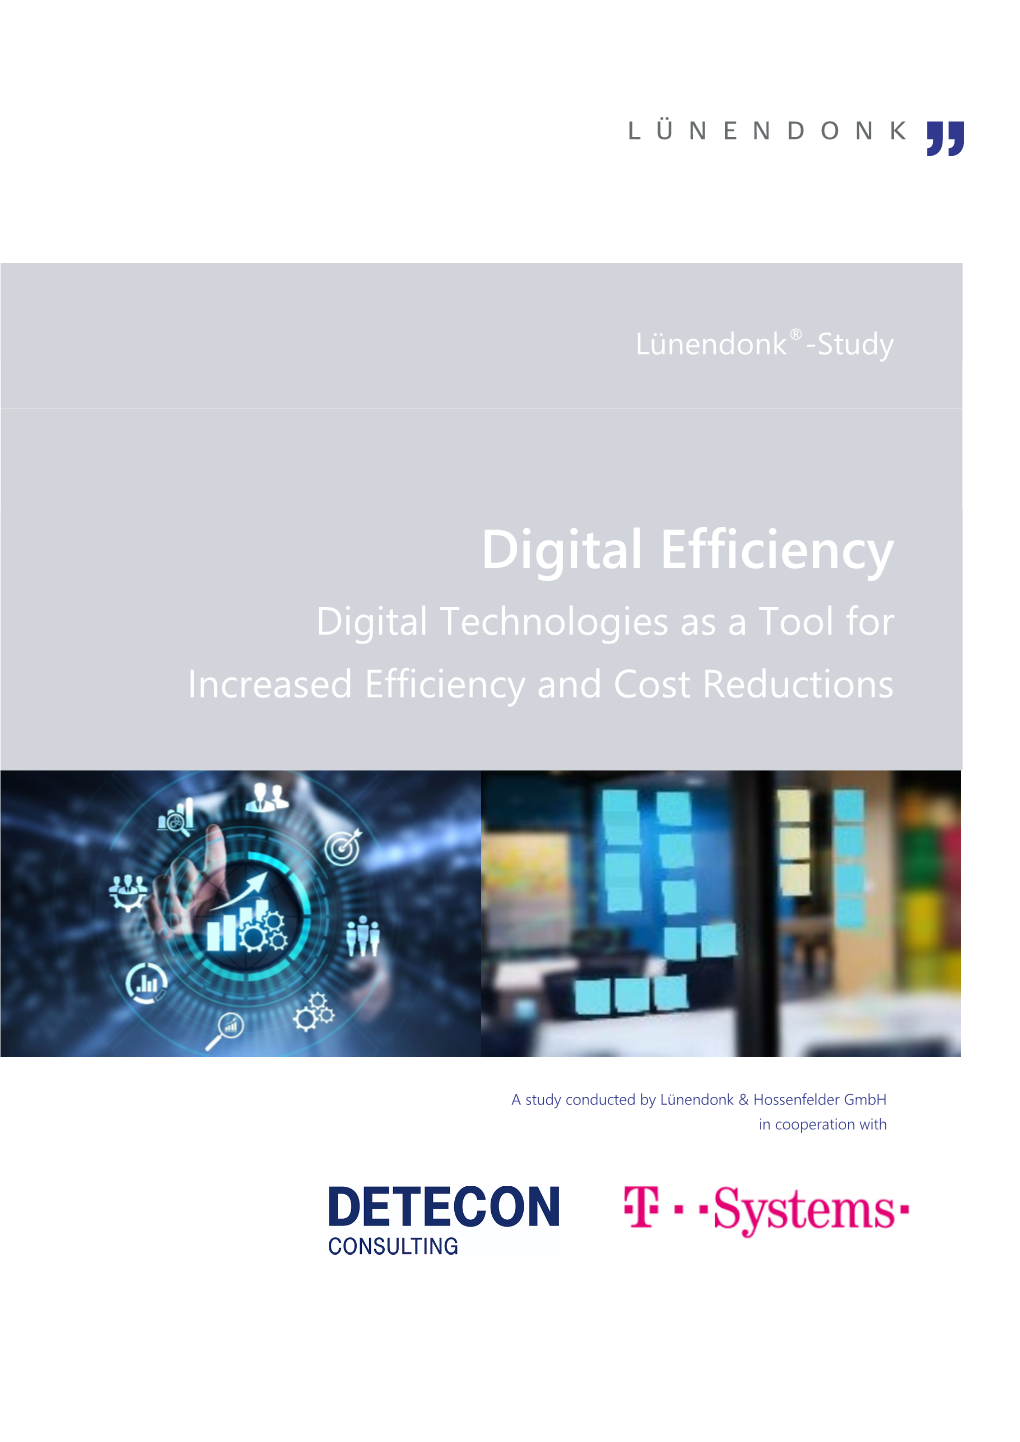 Digital Efficiency Digital Technologies As a Tool for Increased Efficiency and Cost Reductions